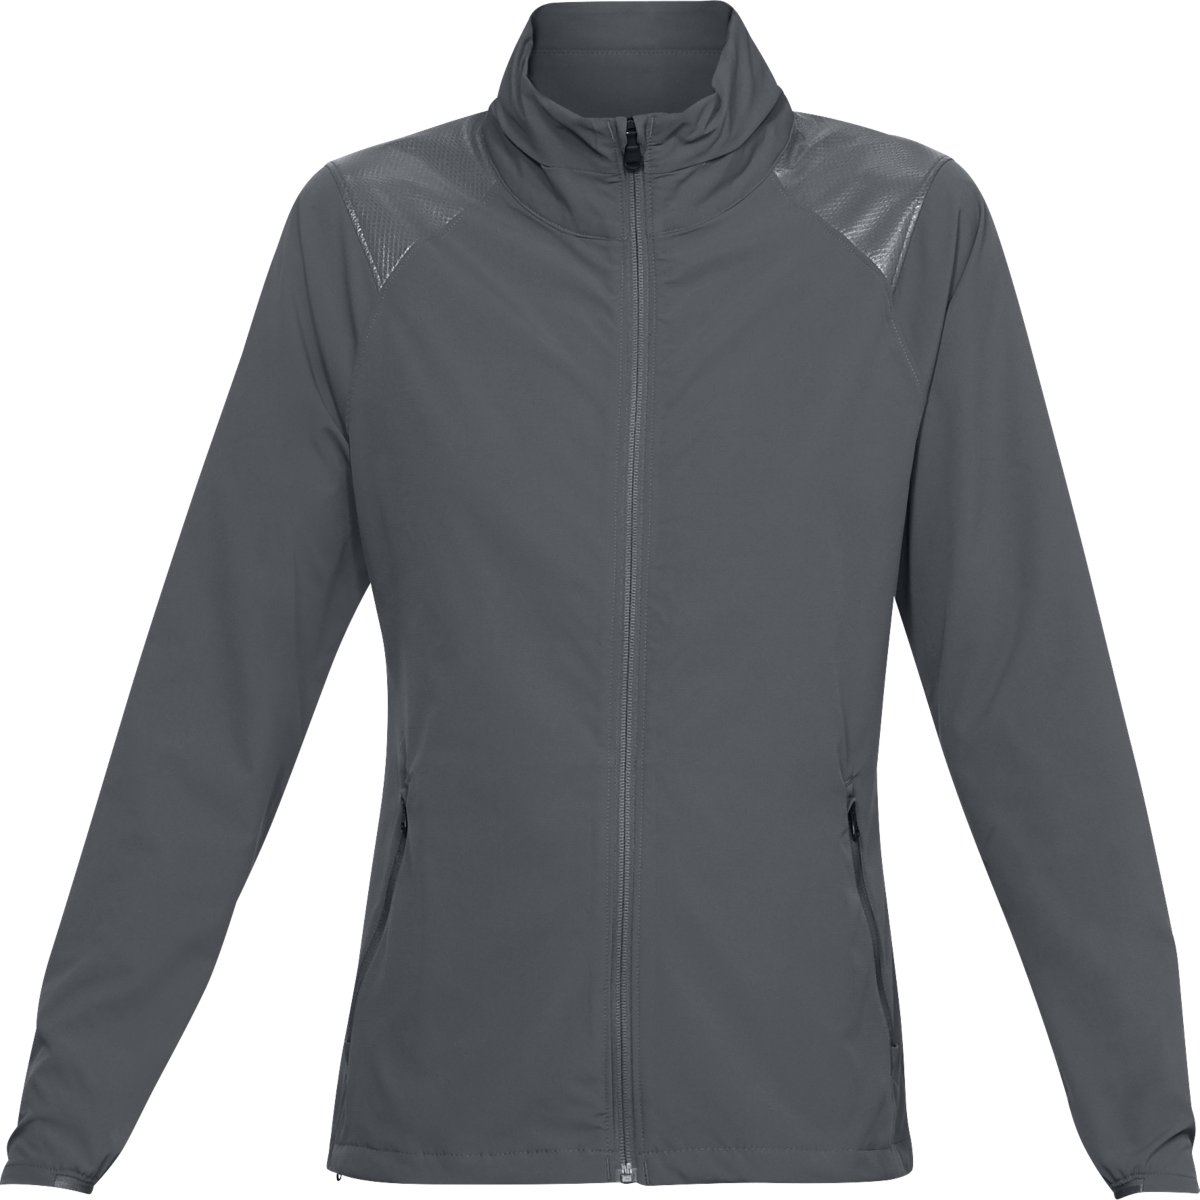 Under Armour Storm Windstrike Full Zip Pitch Gray – XS